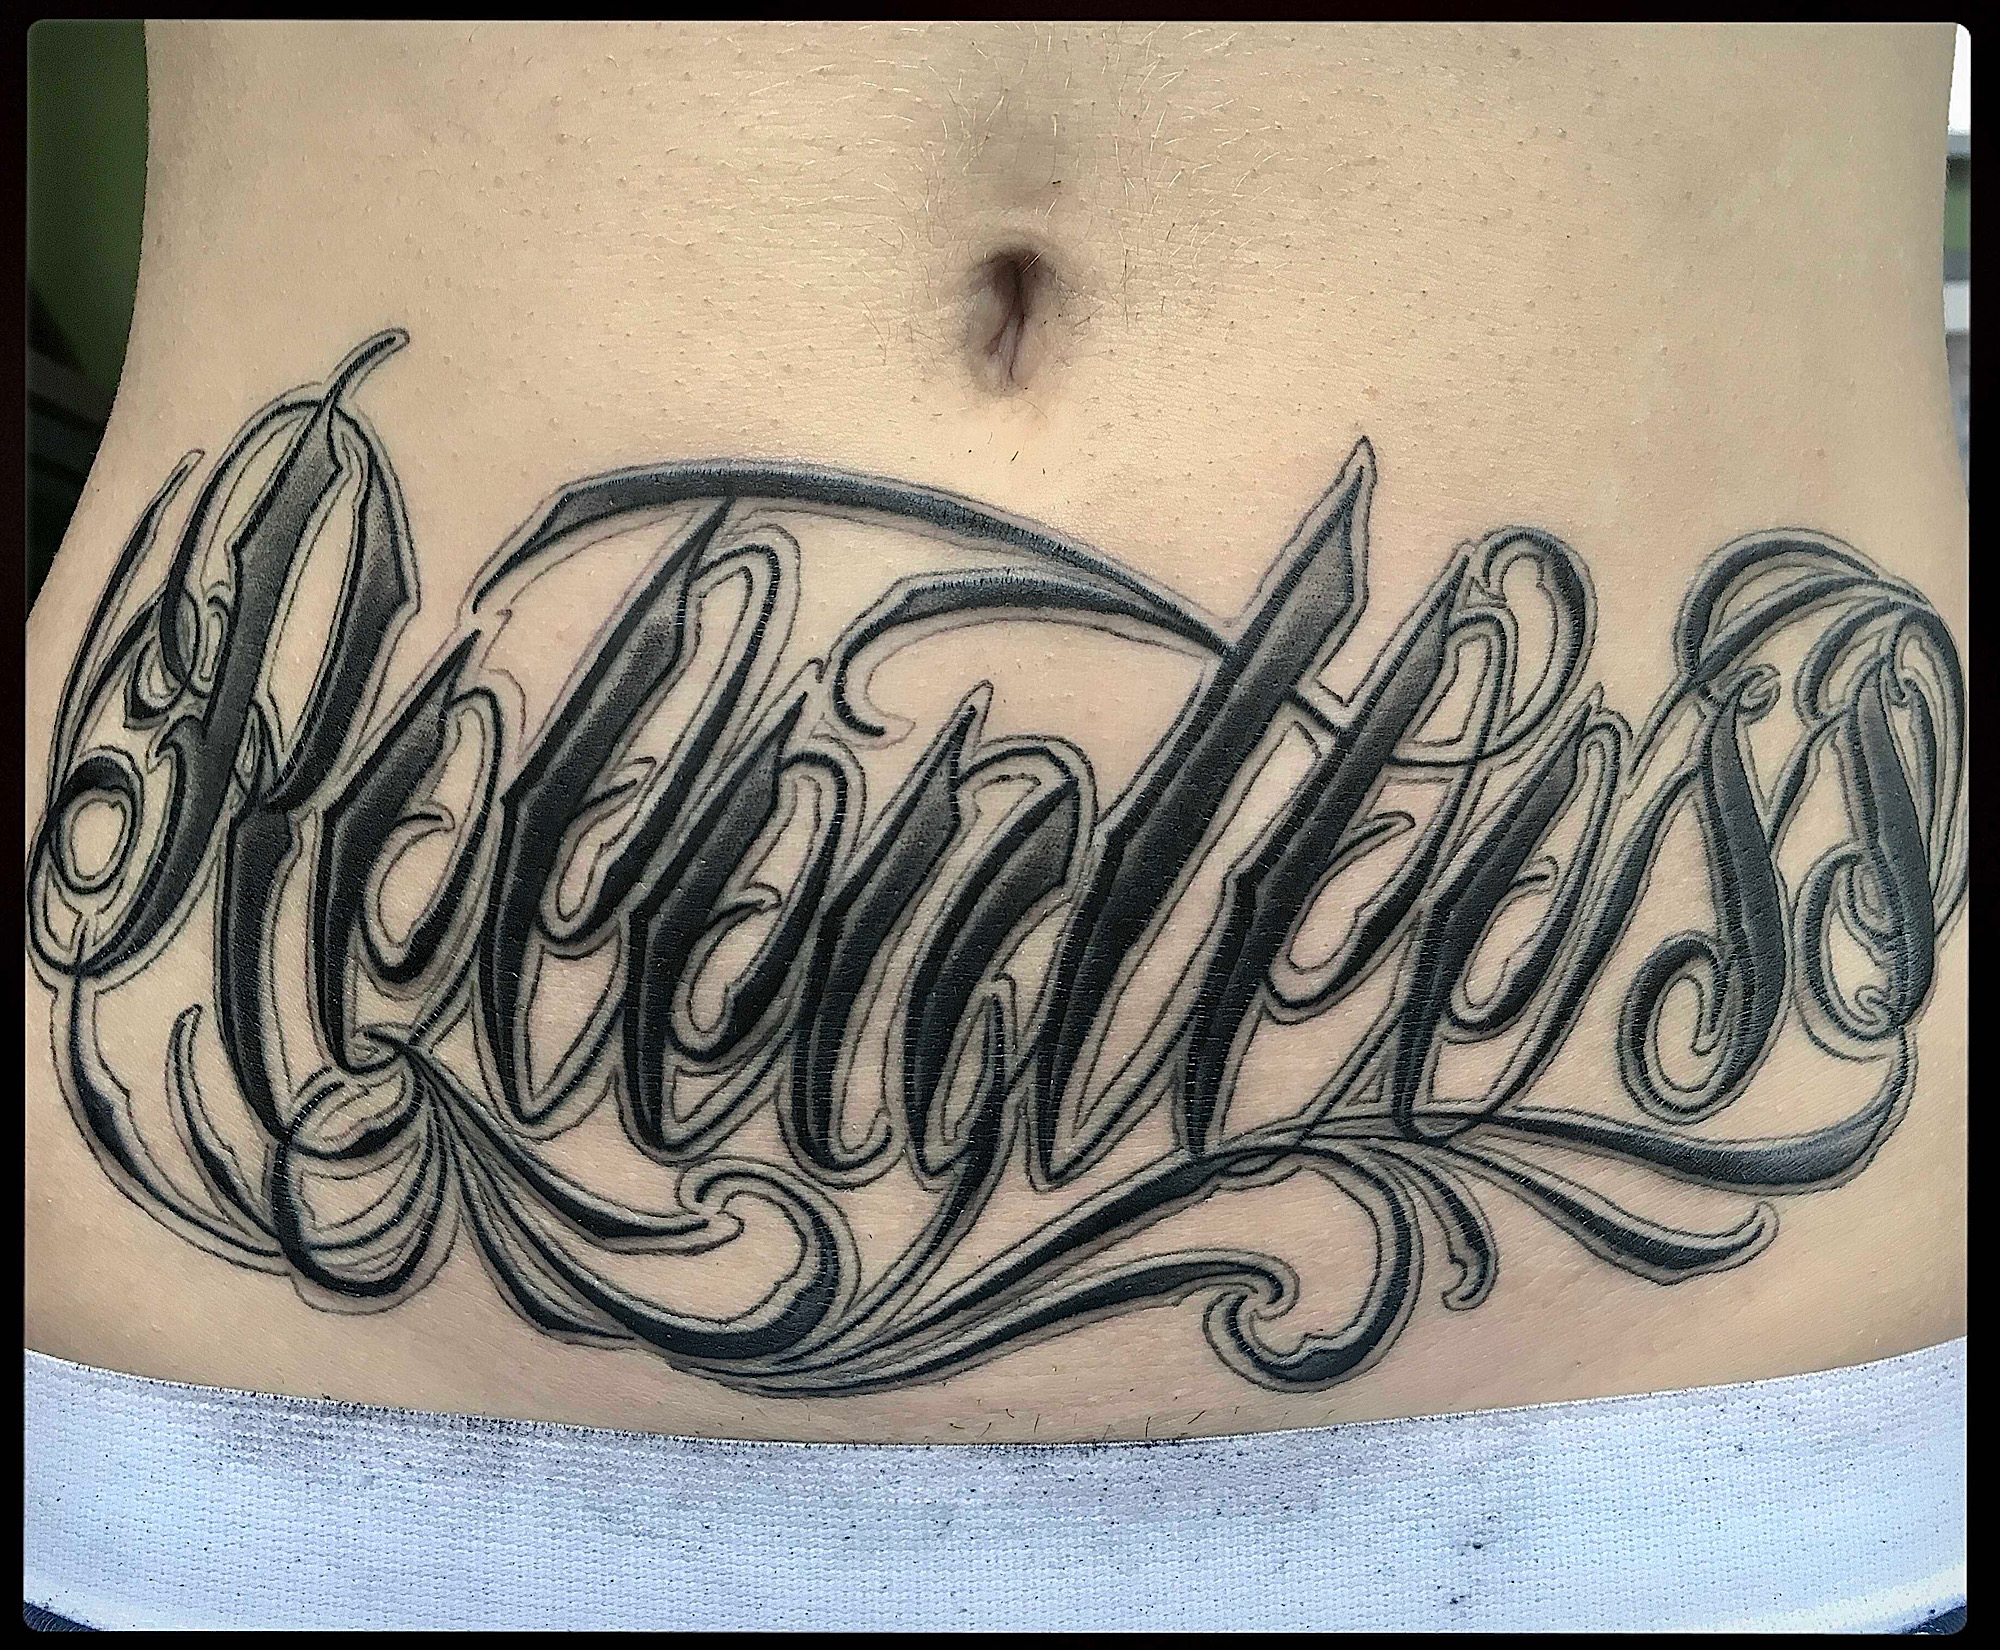 relentless script stomach tattoo love letters black and grey gray lettering tattoo love letters by Ricks custom tattooing Ricardo Pedro at Nexus Collective